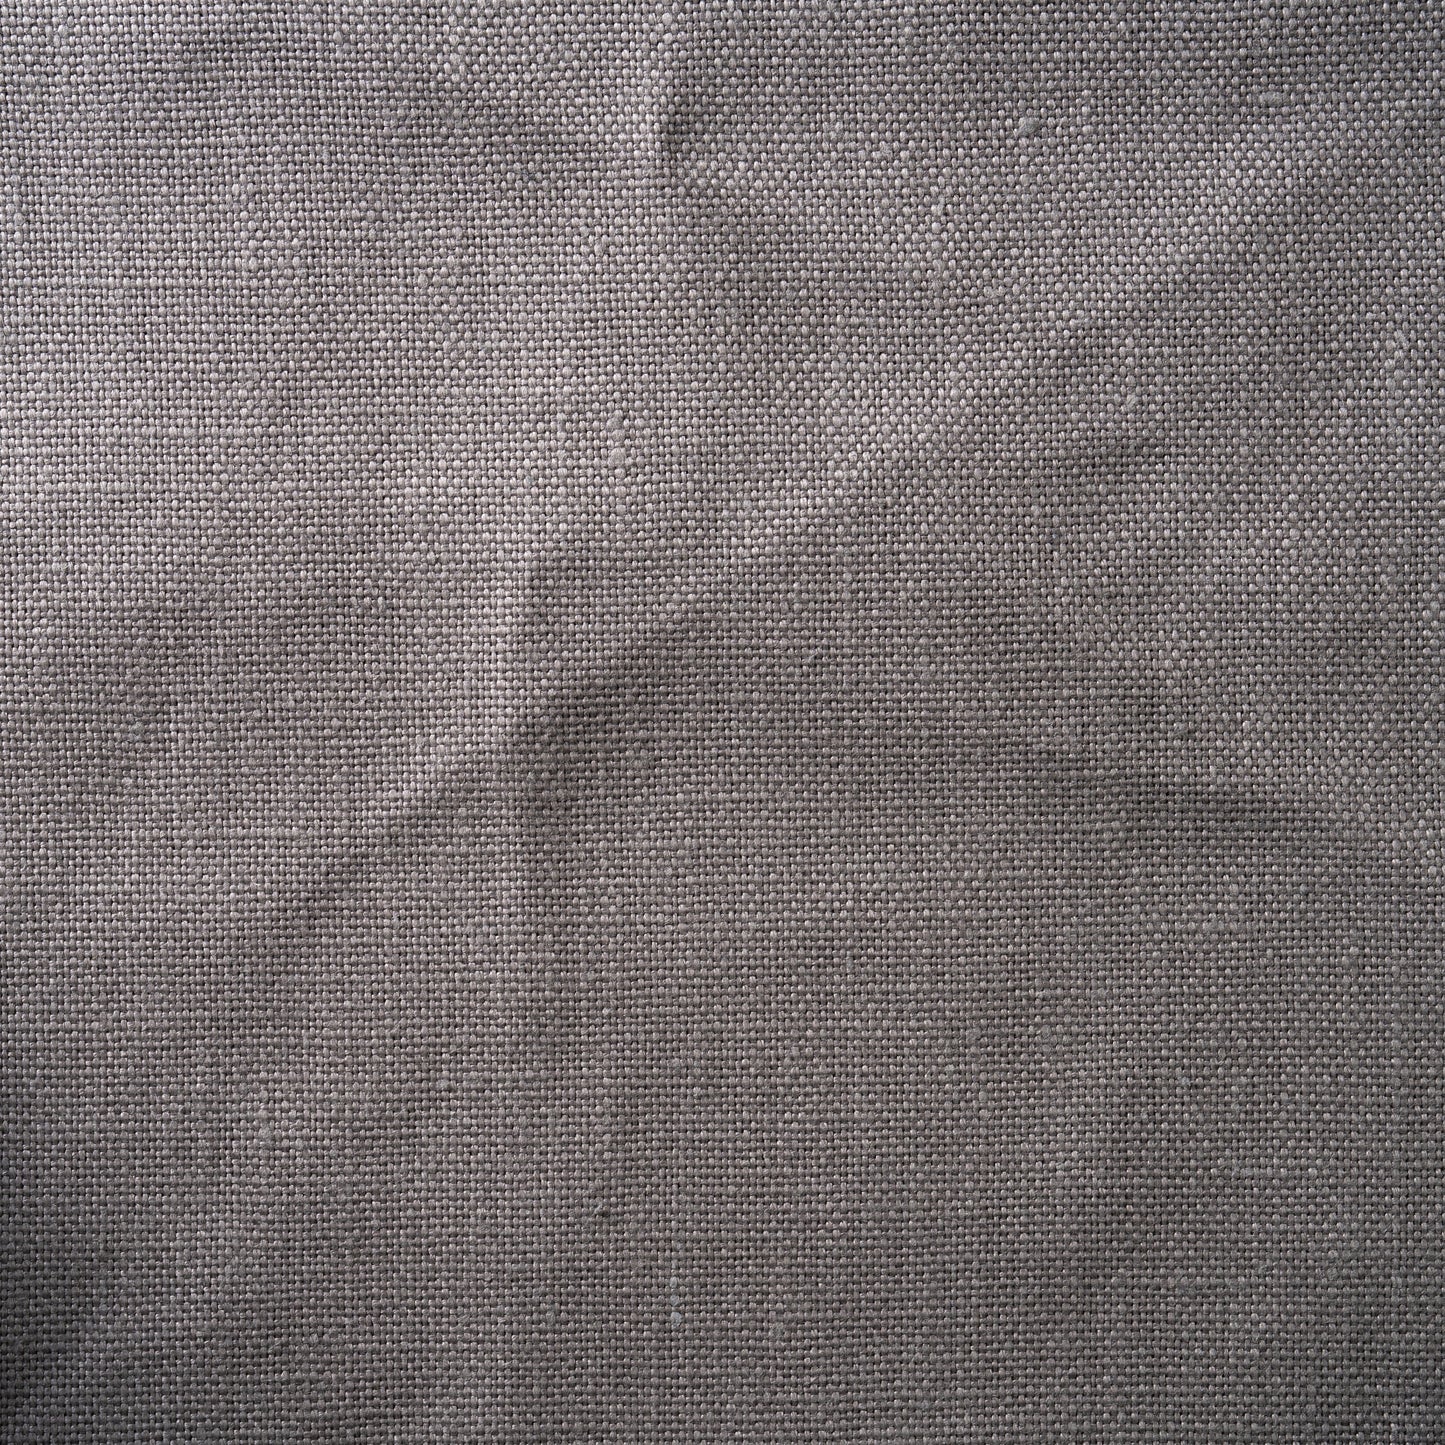 12 oz/sq yard 100% Upholstery/ Slipcover Weight Linen Pewter